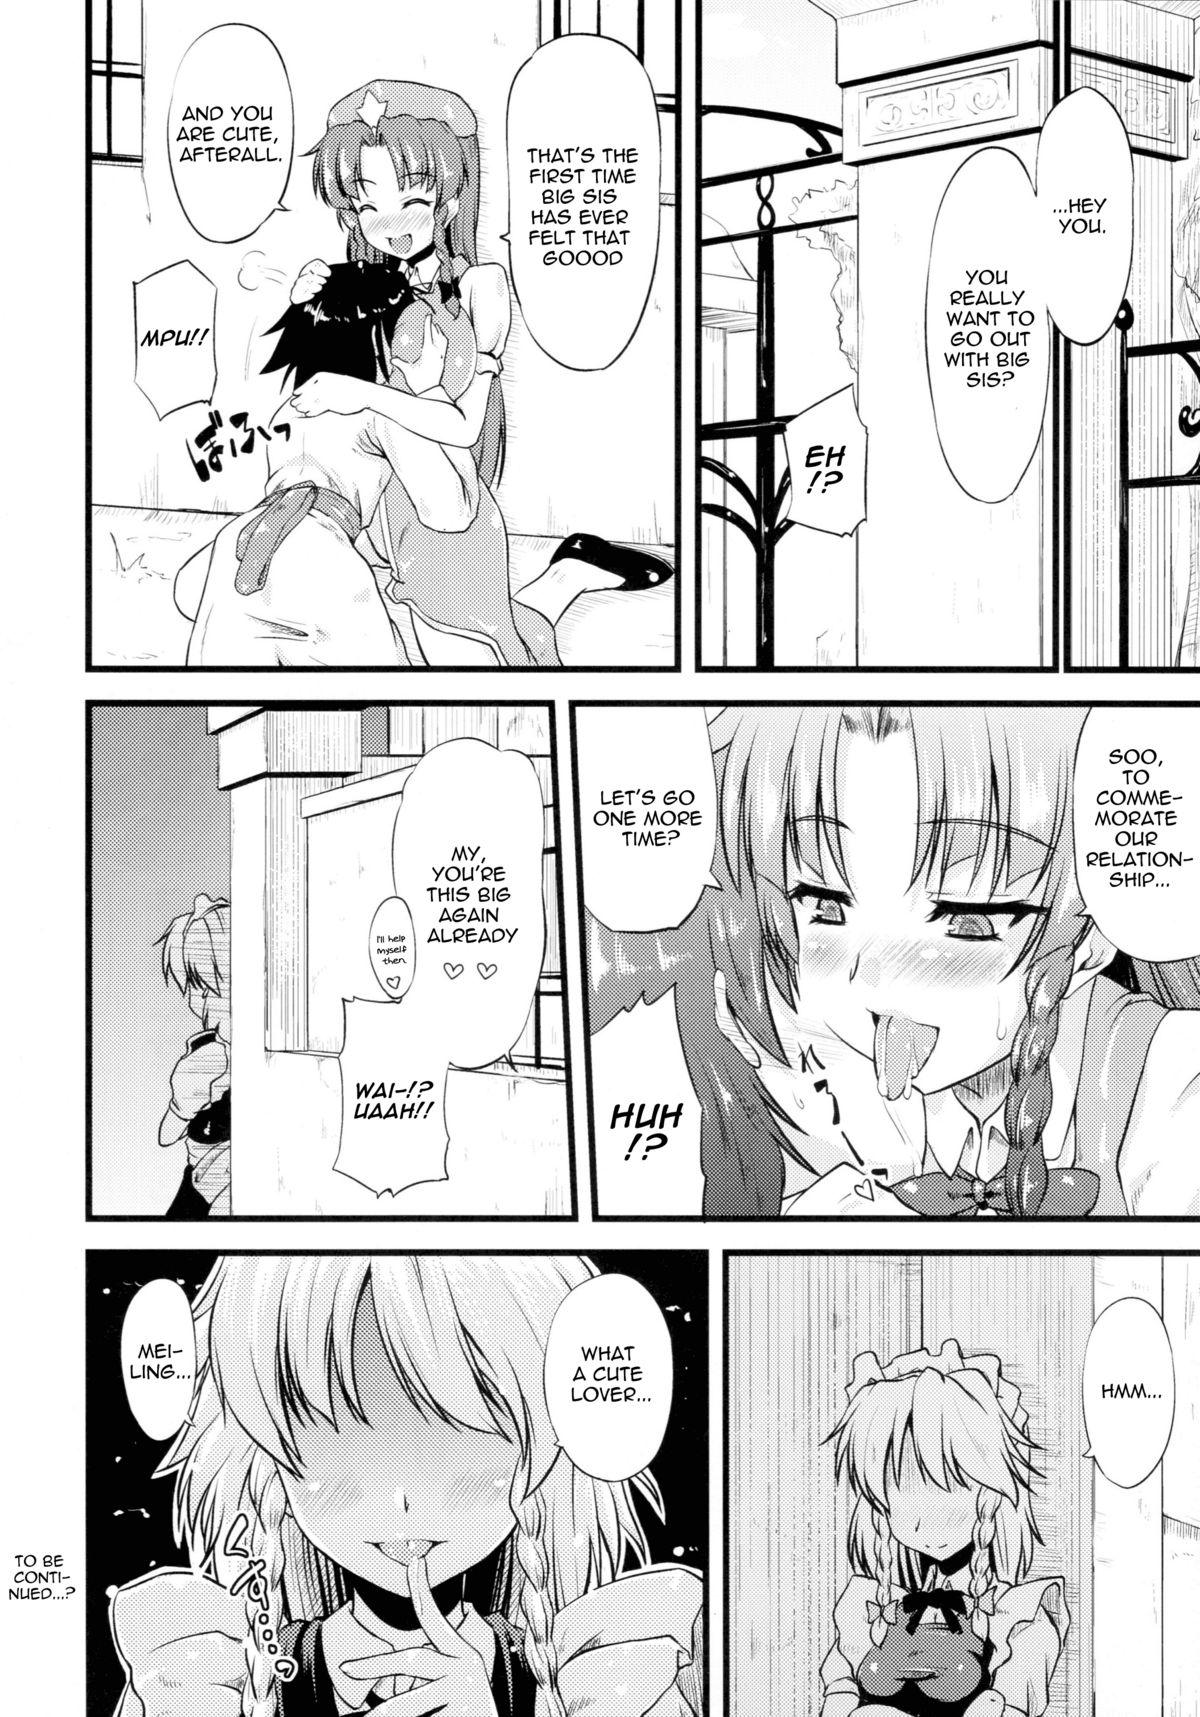 (Reitaisai 8) [from SCRATCH (Johnny)] Monban no Onee-san ga Aite Shite Ageru. | The Gatekeeper Lady is my Partner (Touhou Project) [English] [UMAD] page 24 full